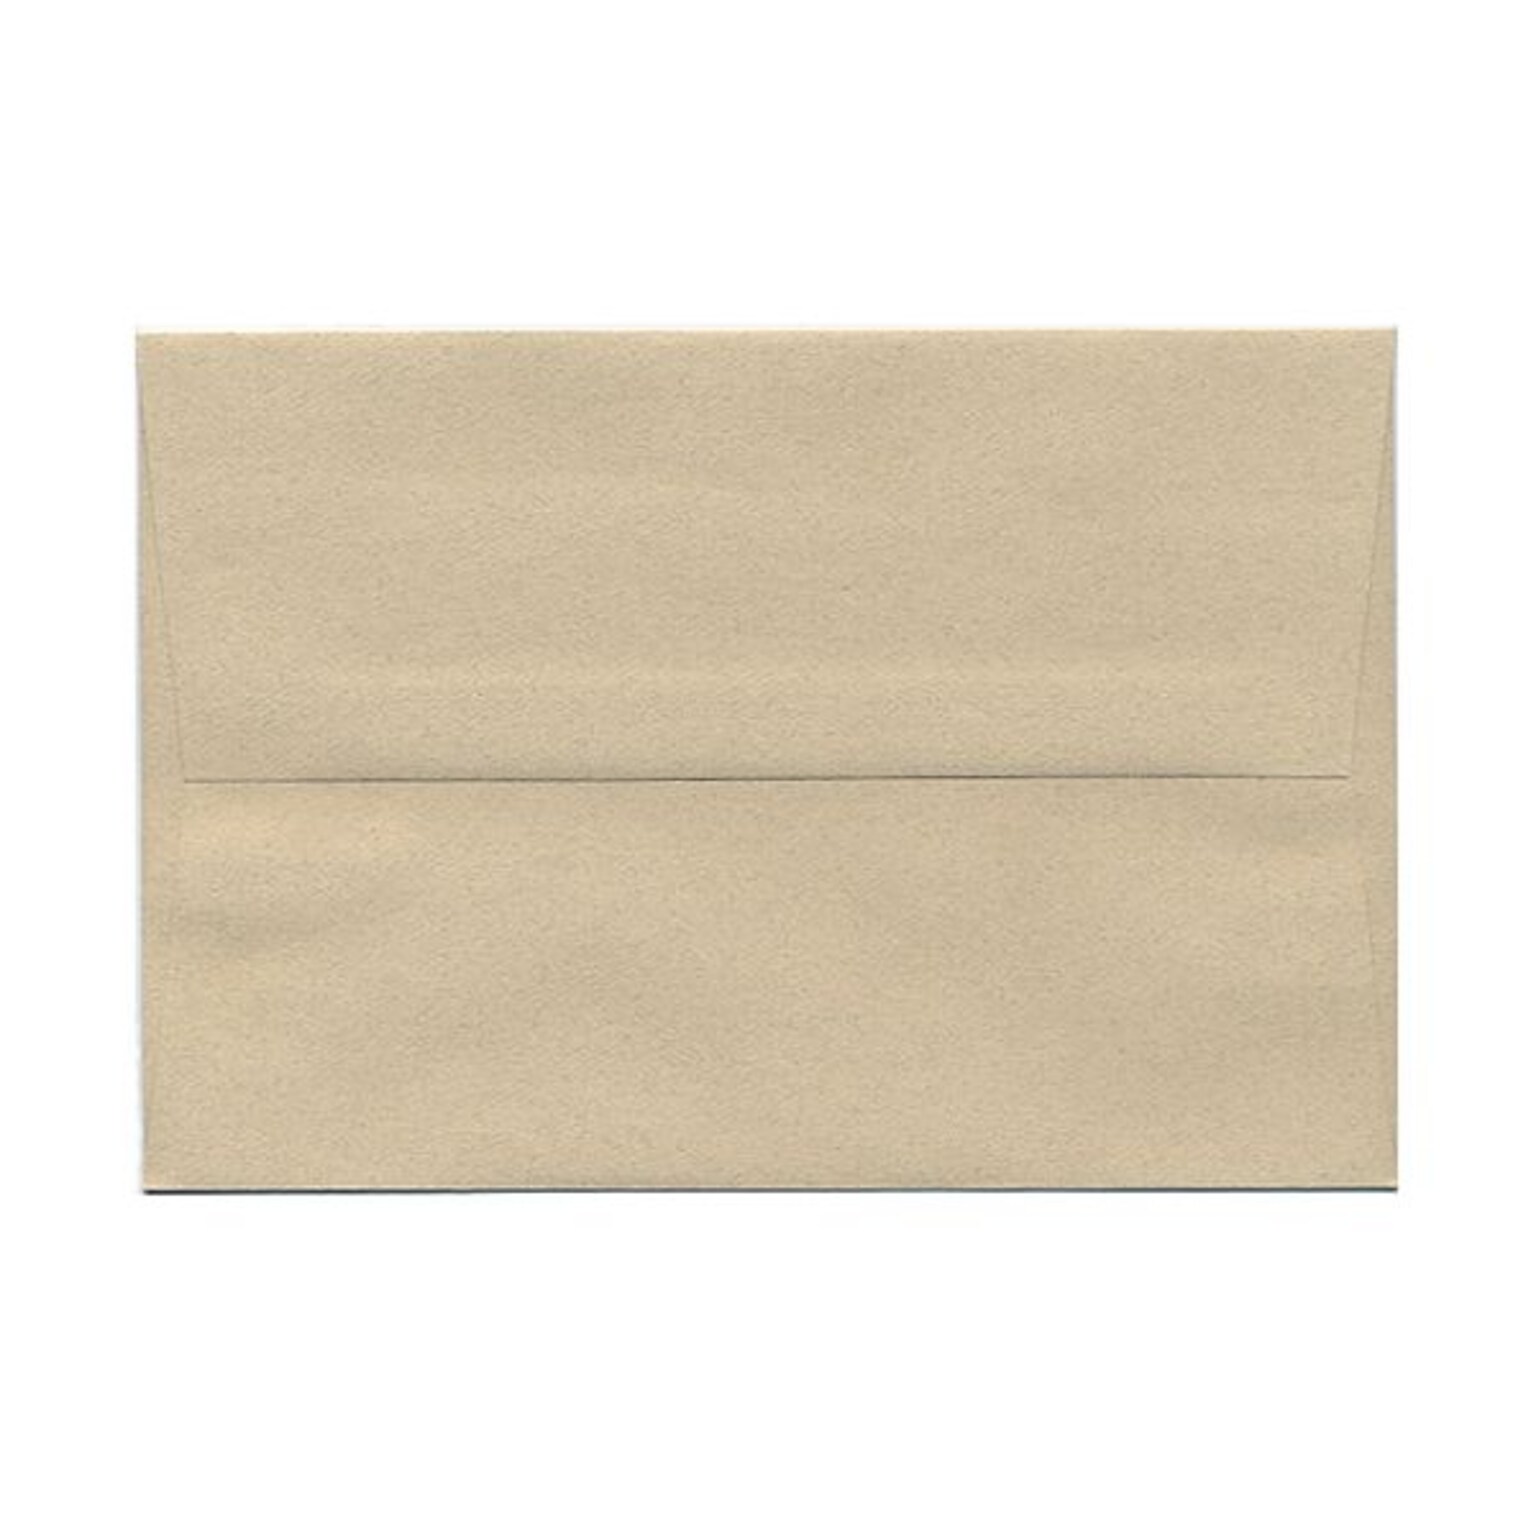 JAM Paper A8 Passport Invitation Envelopes, 5.5 x 8.125, Sandstone Brown Recycled, 25/Pack (83728)